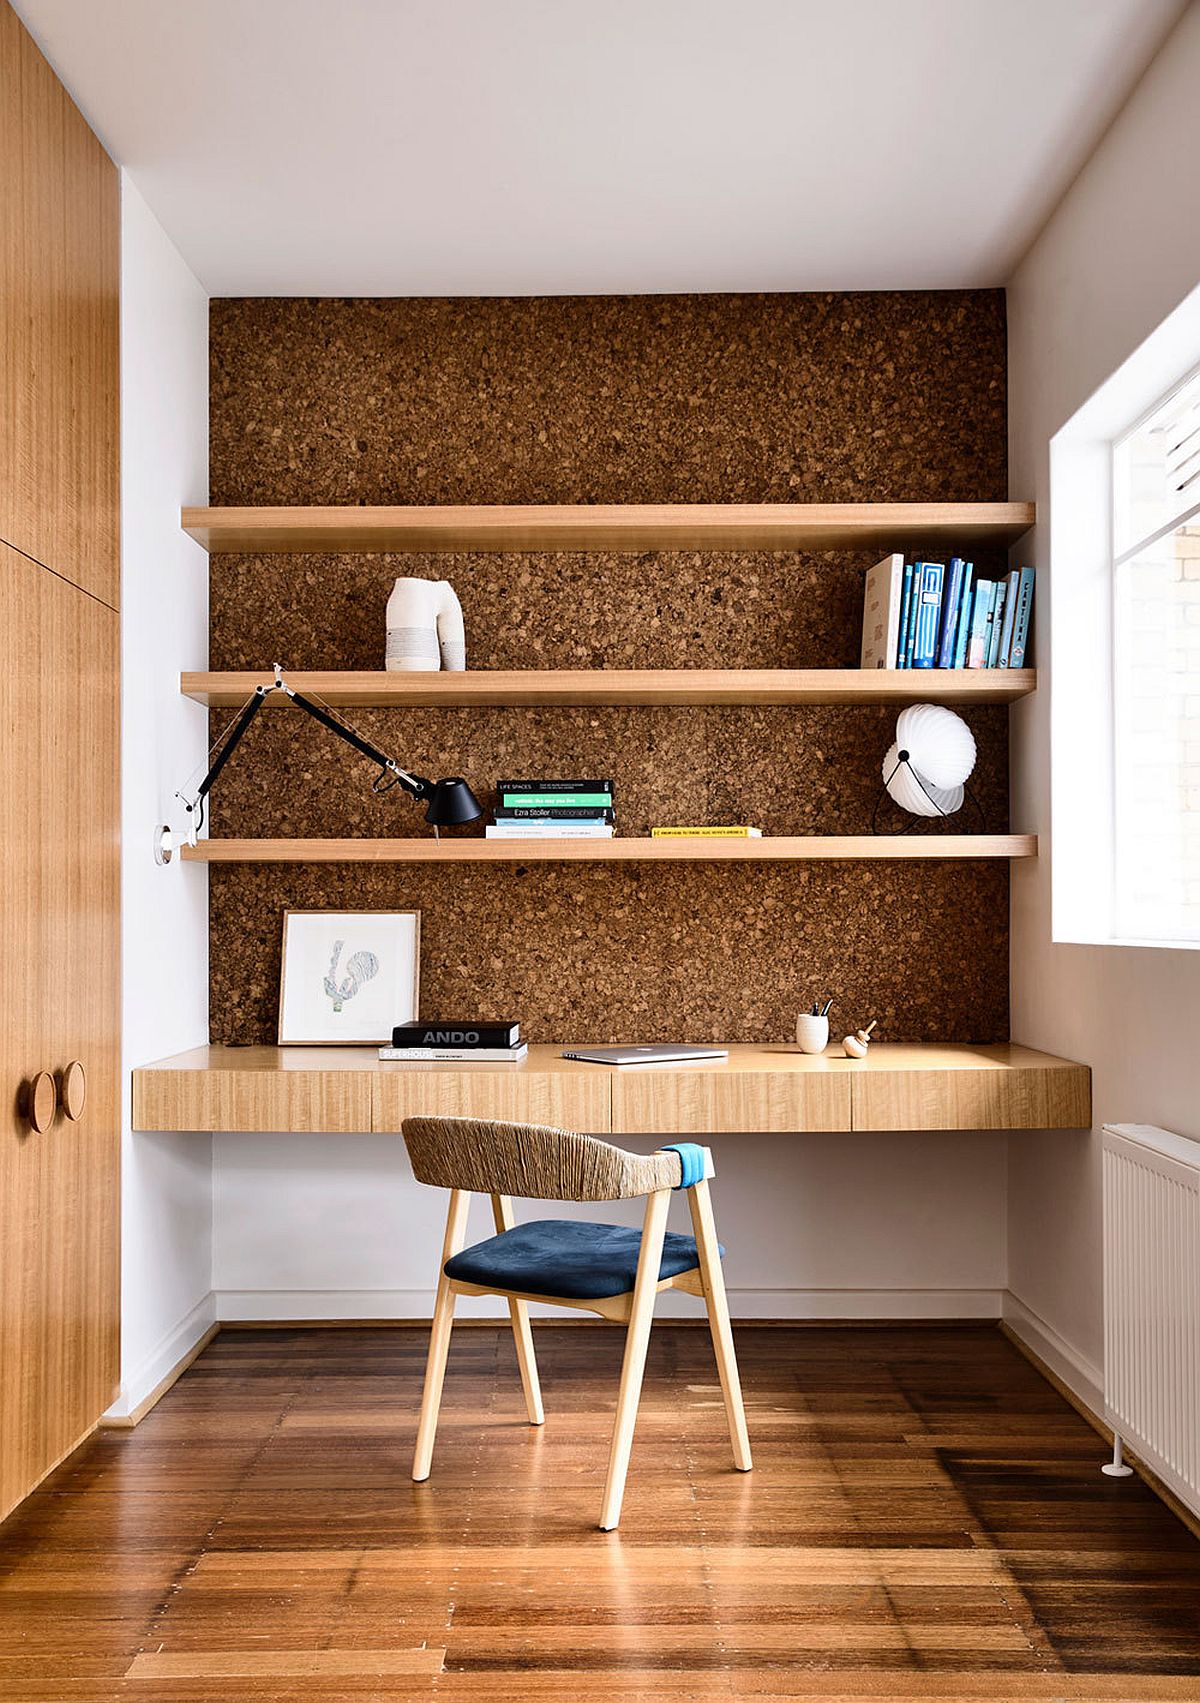 Space-savvy-home-workspace-at-the-end-of-the-hallway-with-floating-shelves